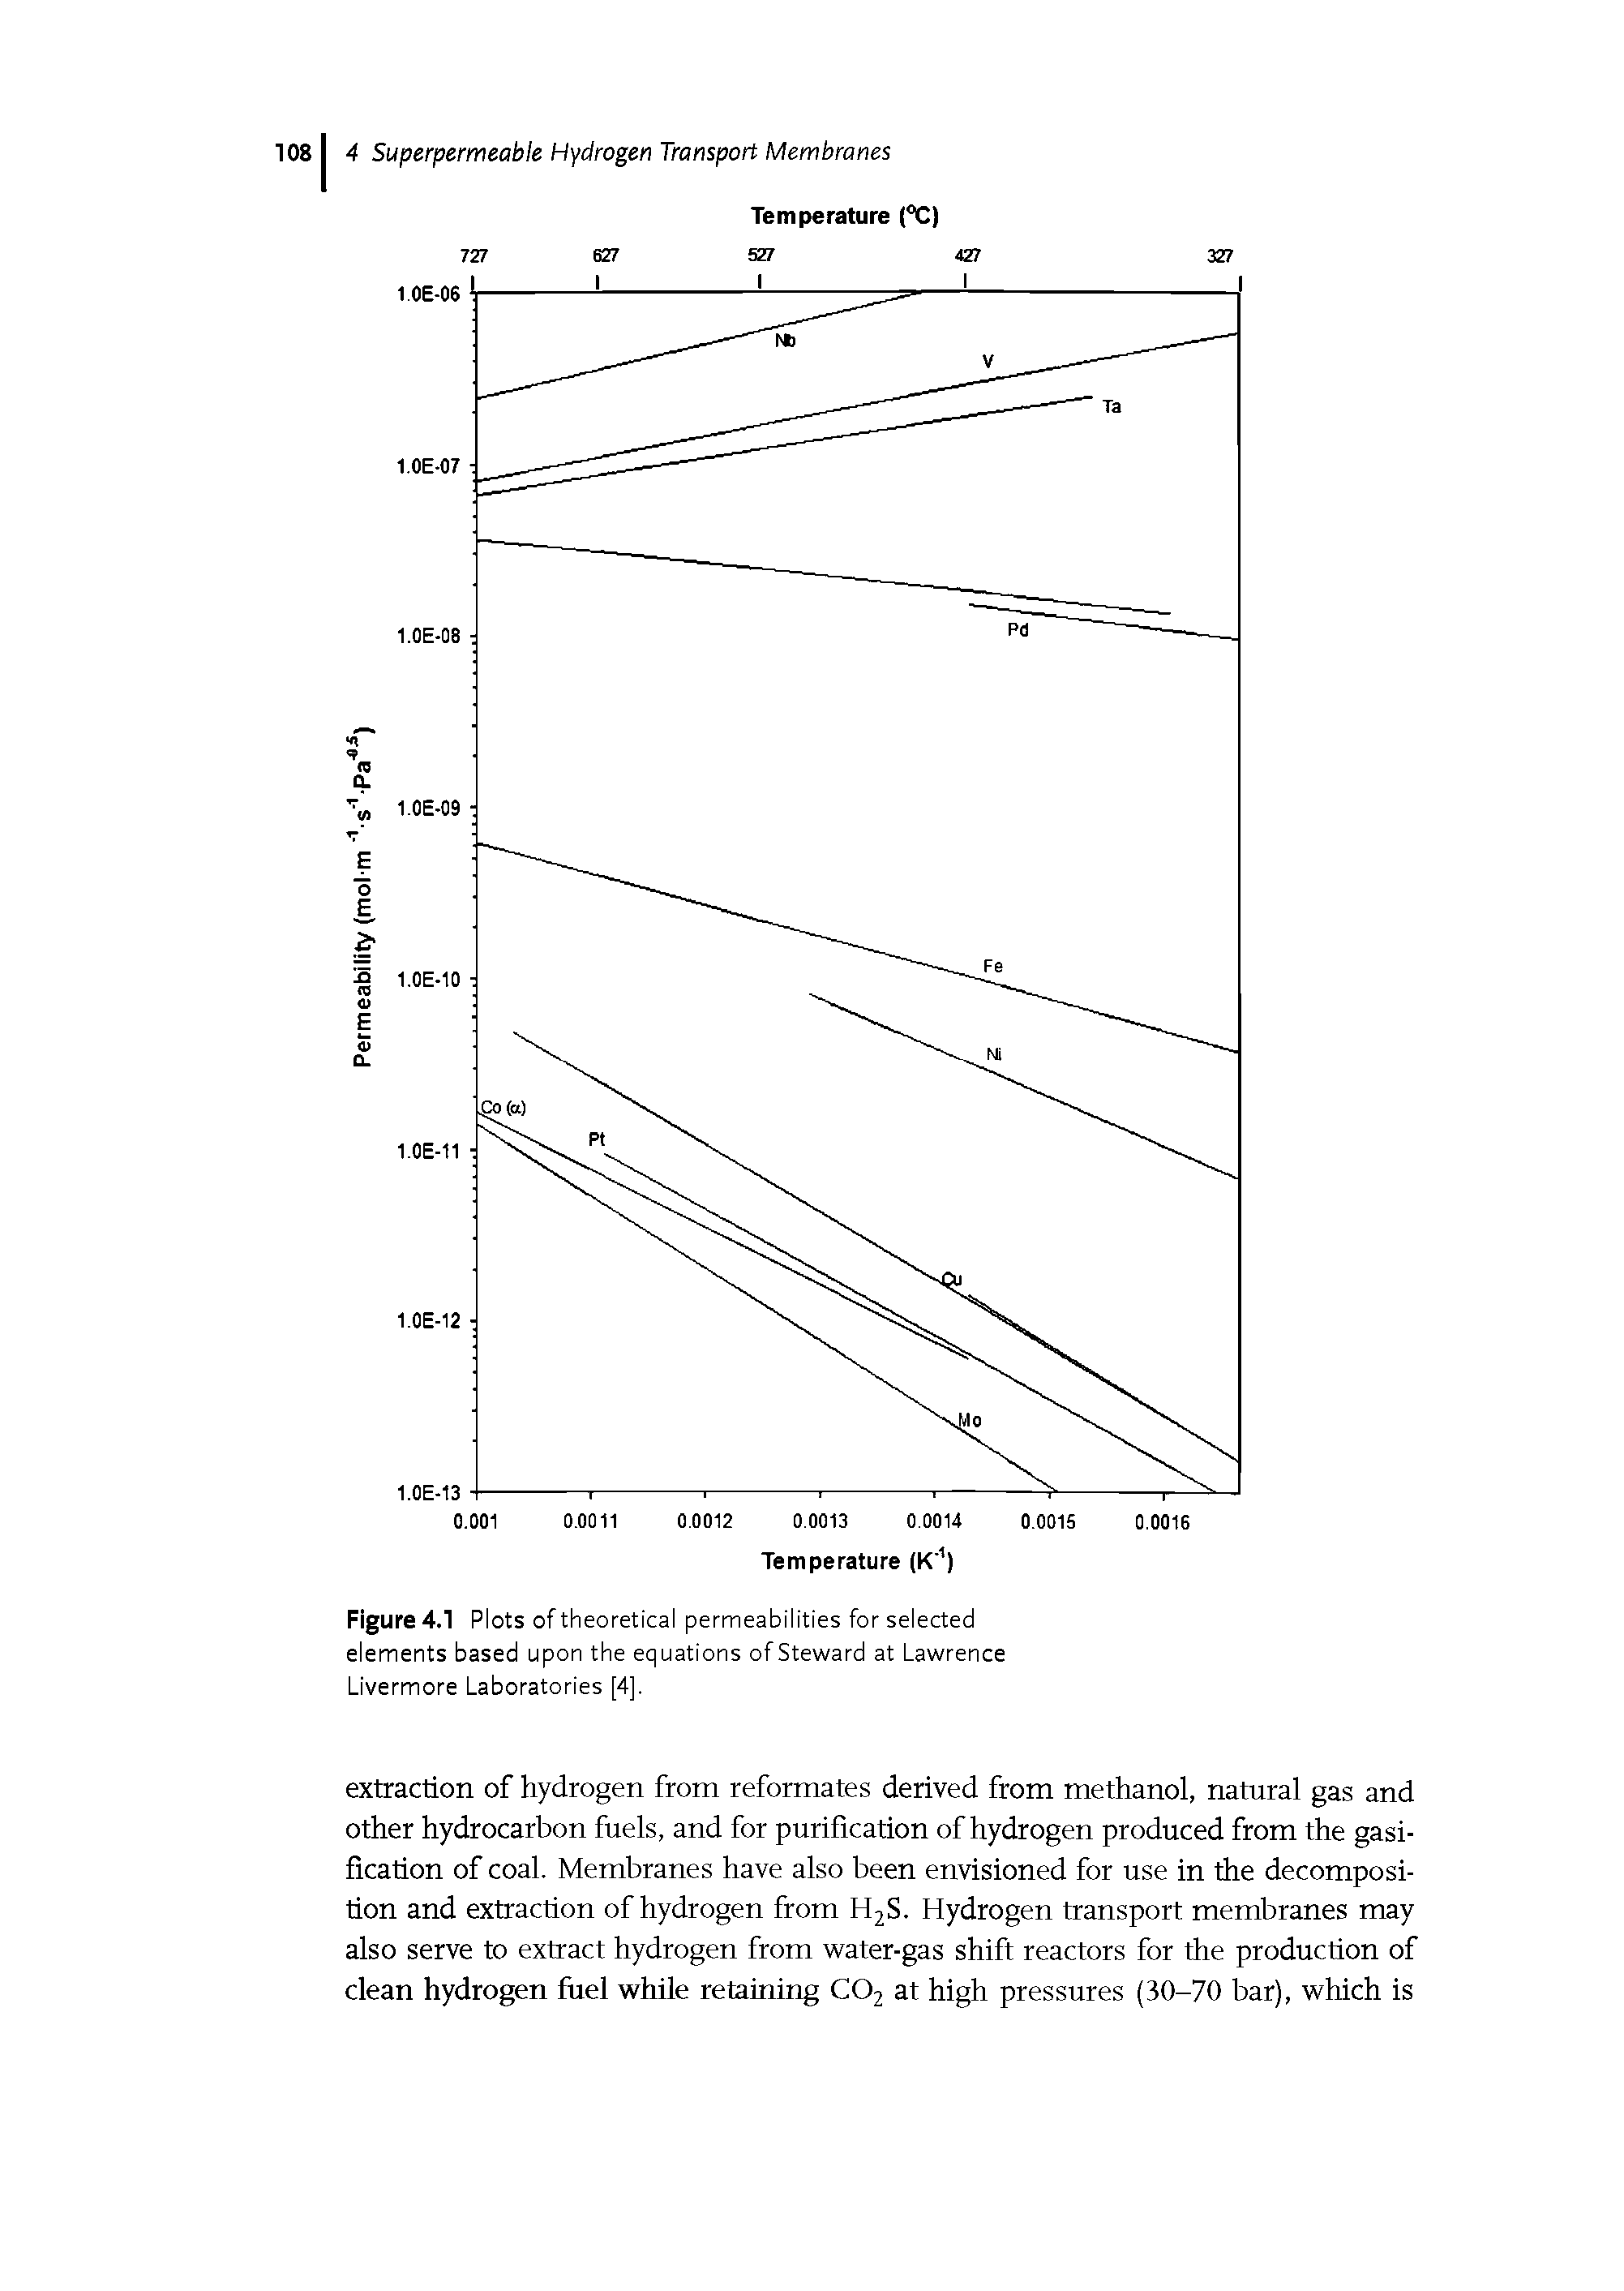 Figure 4.1 Plots of theoretical permeabilities for selected elements based upon the equations of Steward at Lawrence Livermore Laboratories [4].